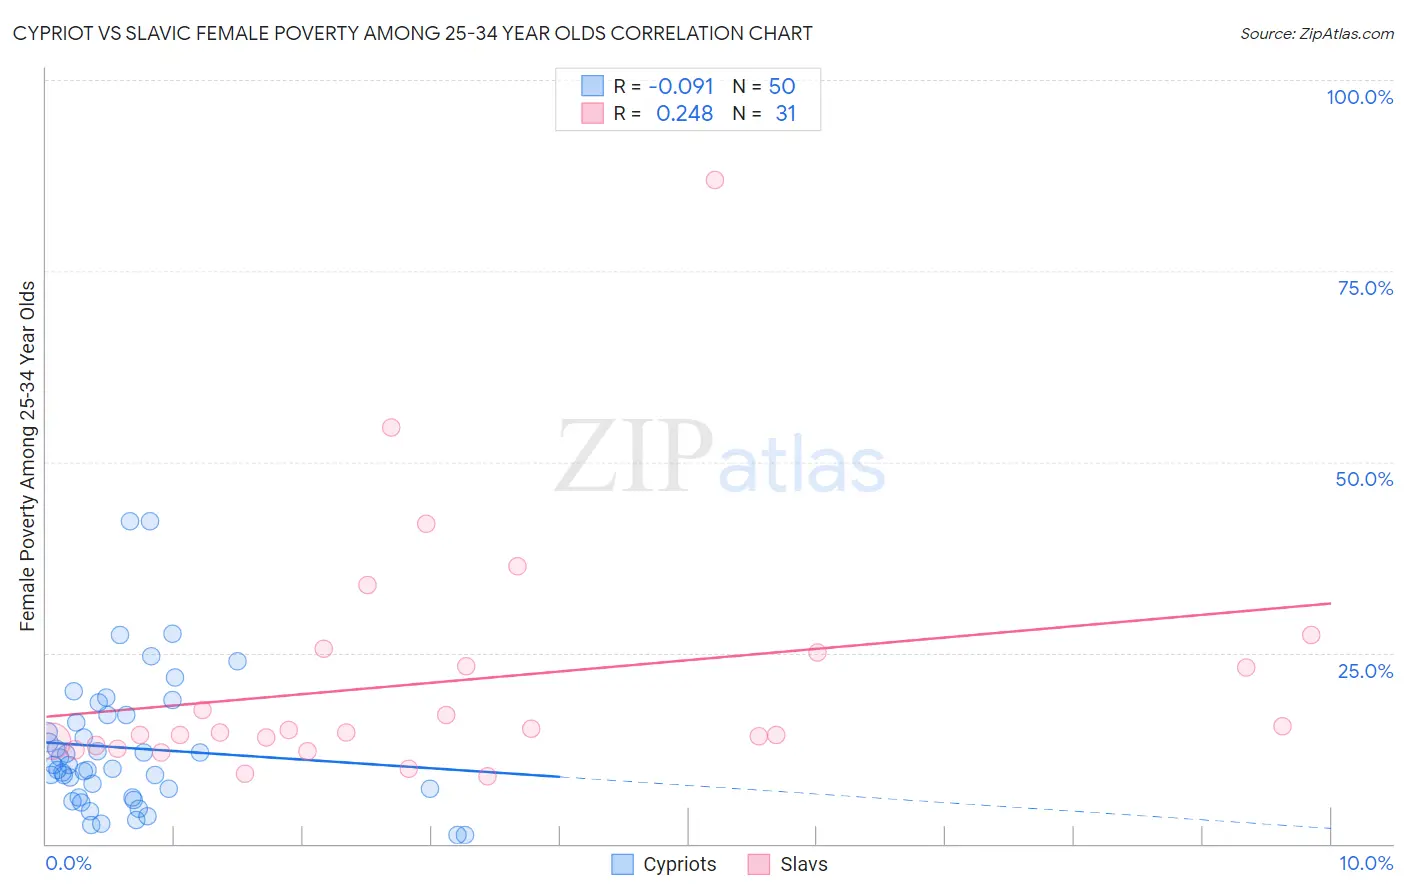 Cypriot vs Slavic Female Poverty Among 25-34 Year Olds